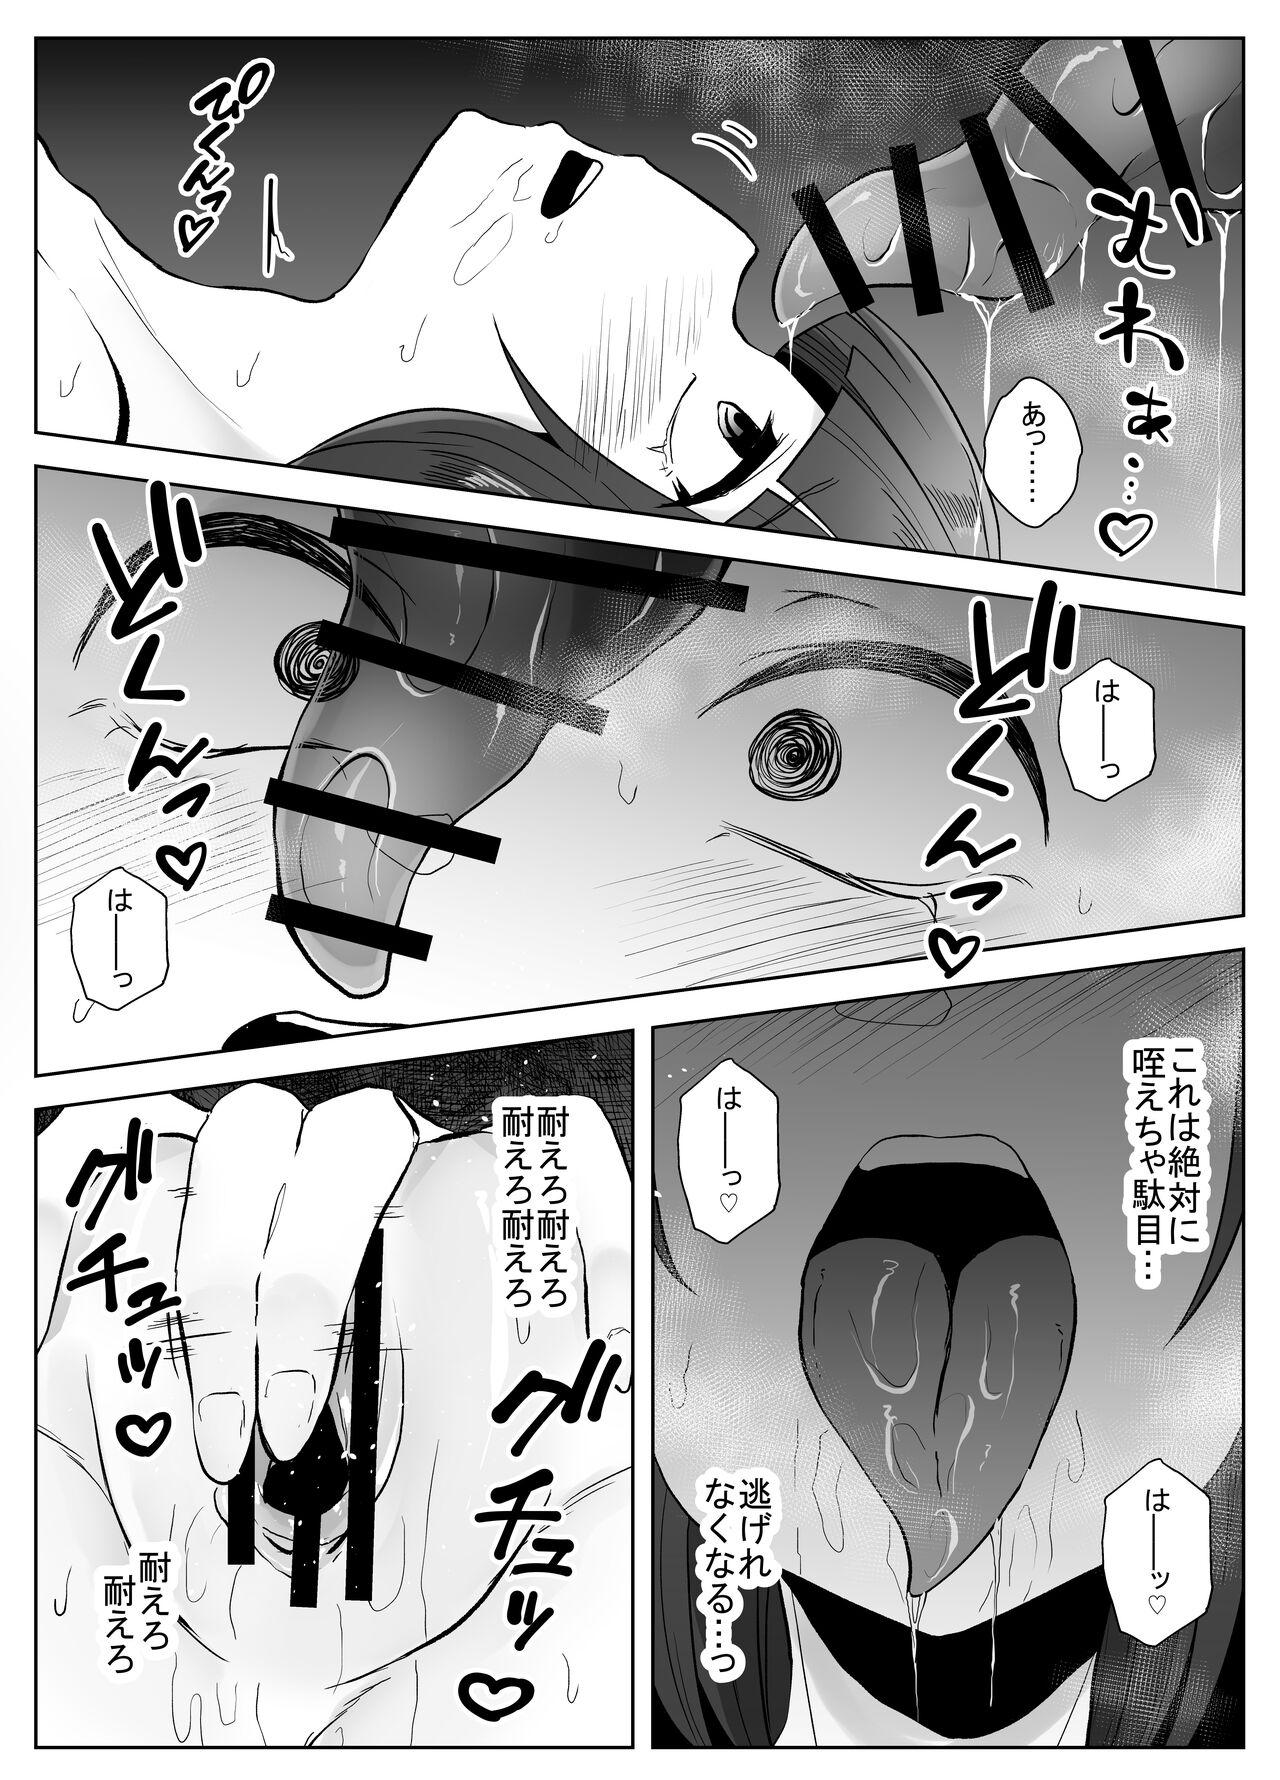 Show 蟲駆士ハヅキ - Original Awesome - Page 11